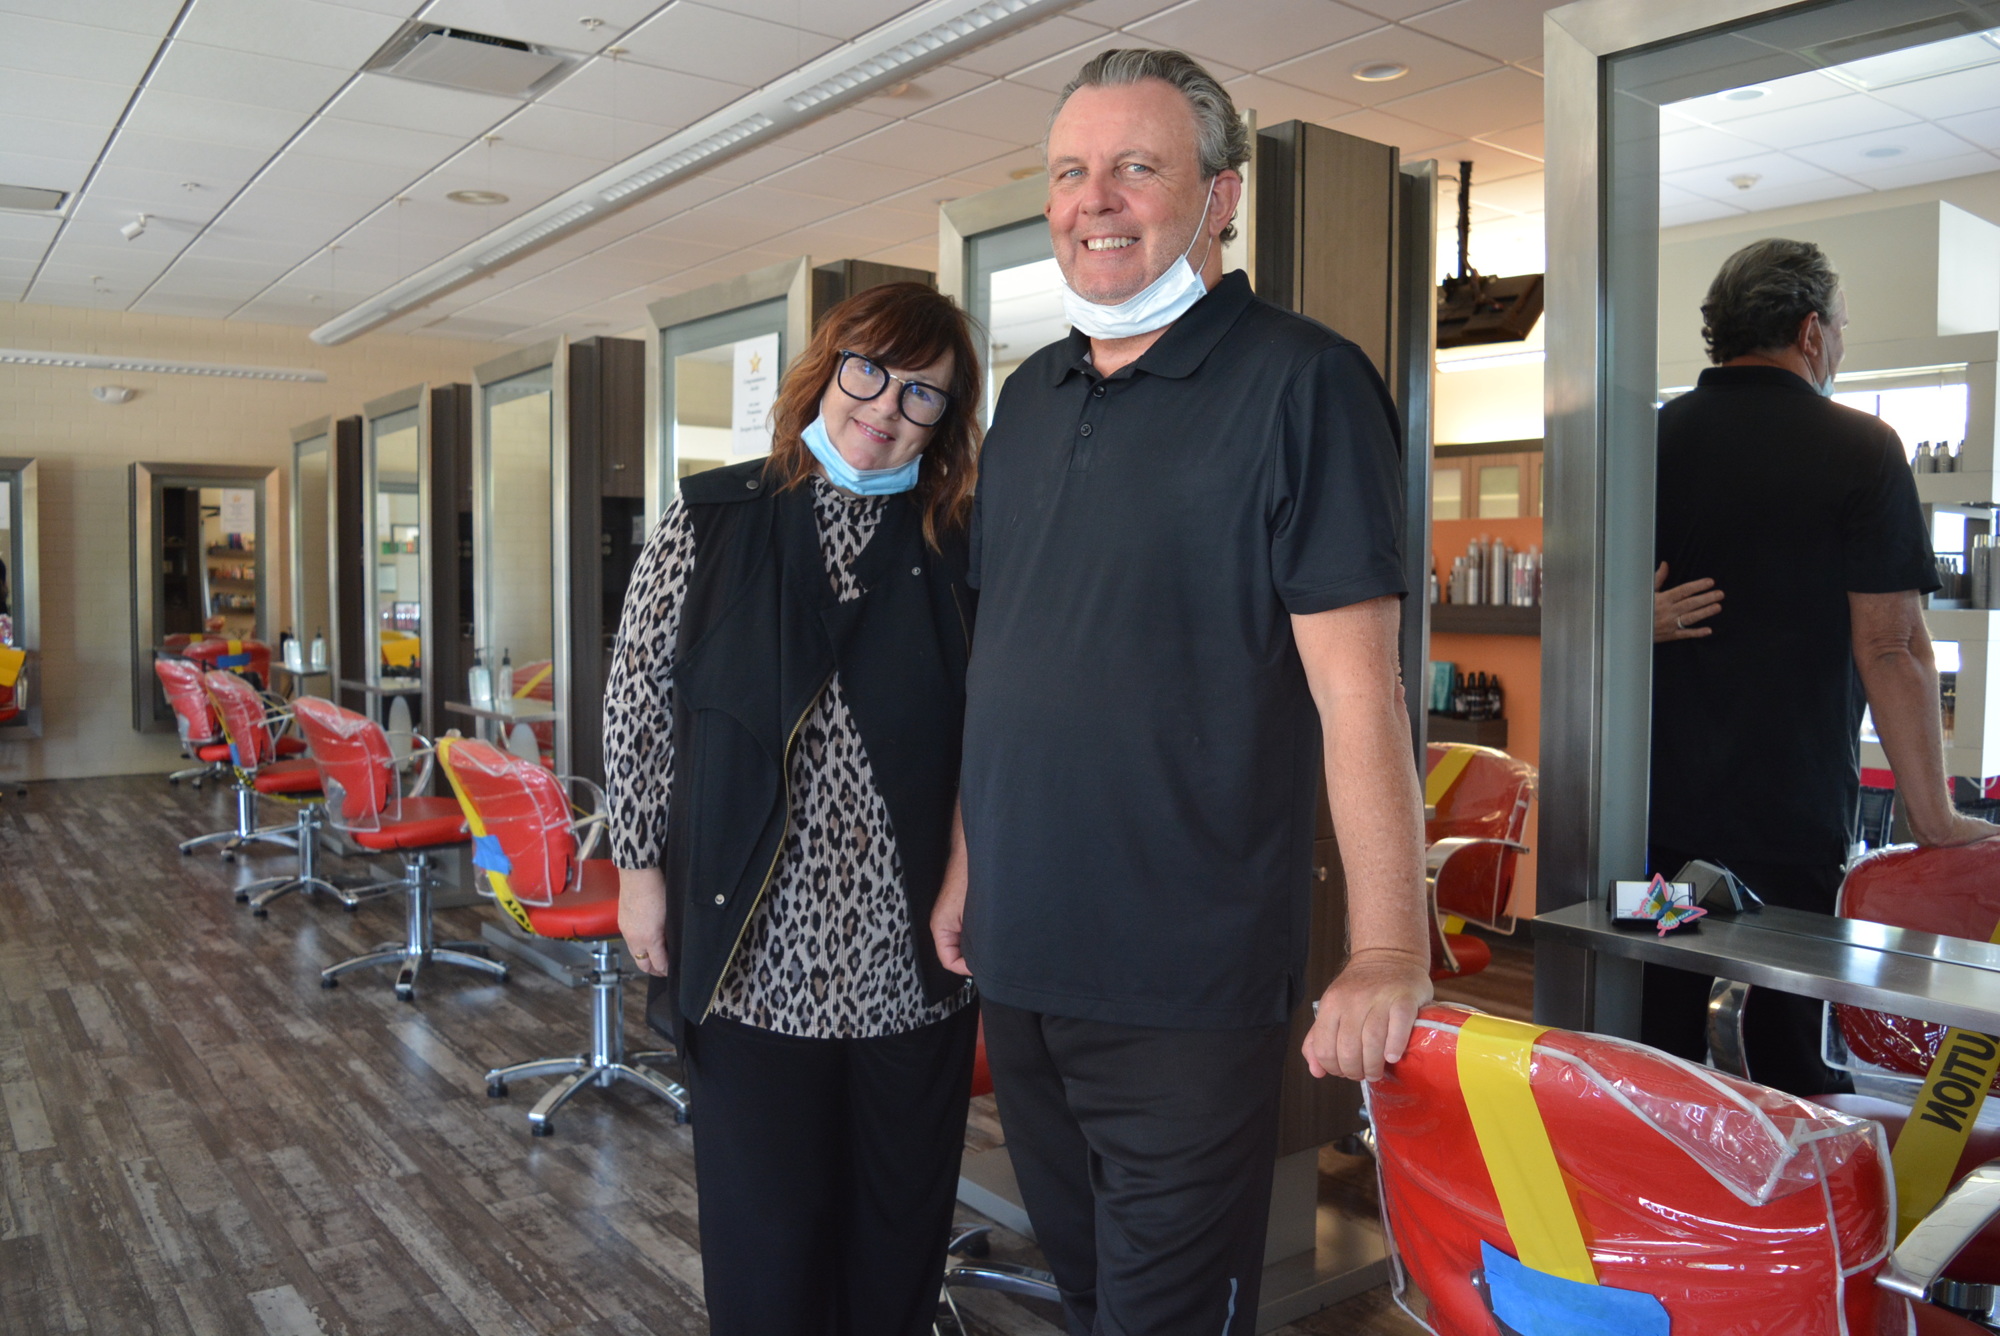 Yellow Strawberry Salon owners Caroline and Desmond Behan have modified employee hours to three 10-hour shifts to help ensure proper social distancing of customers.